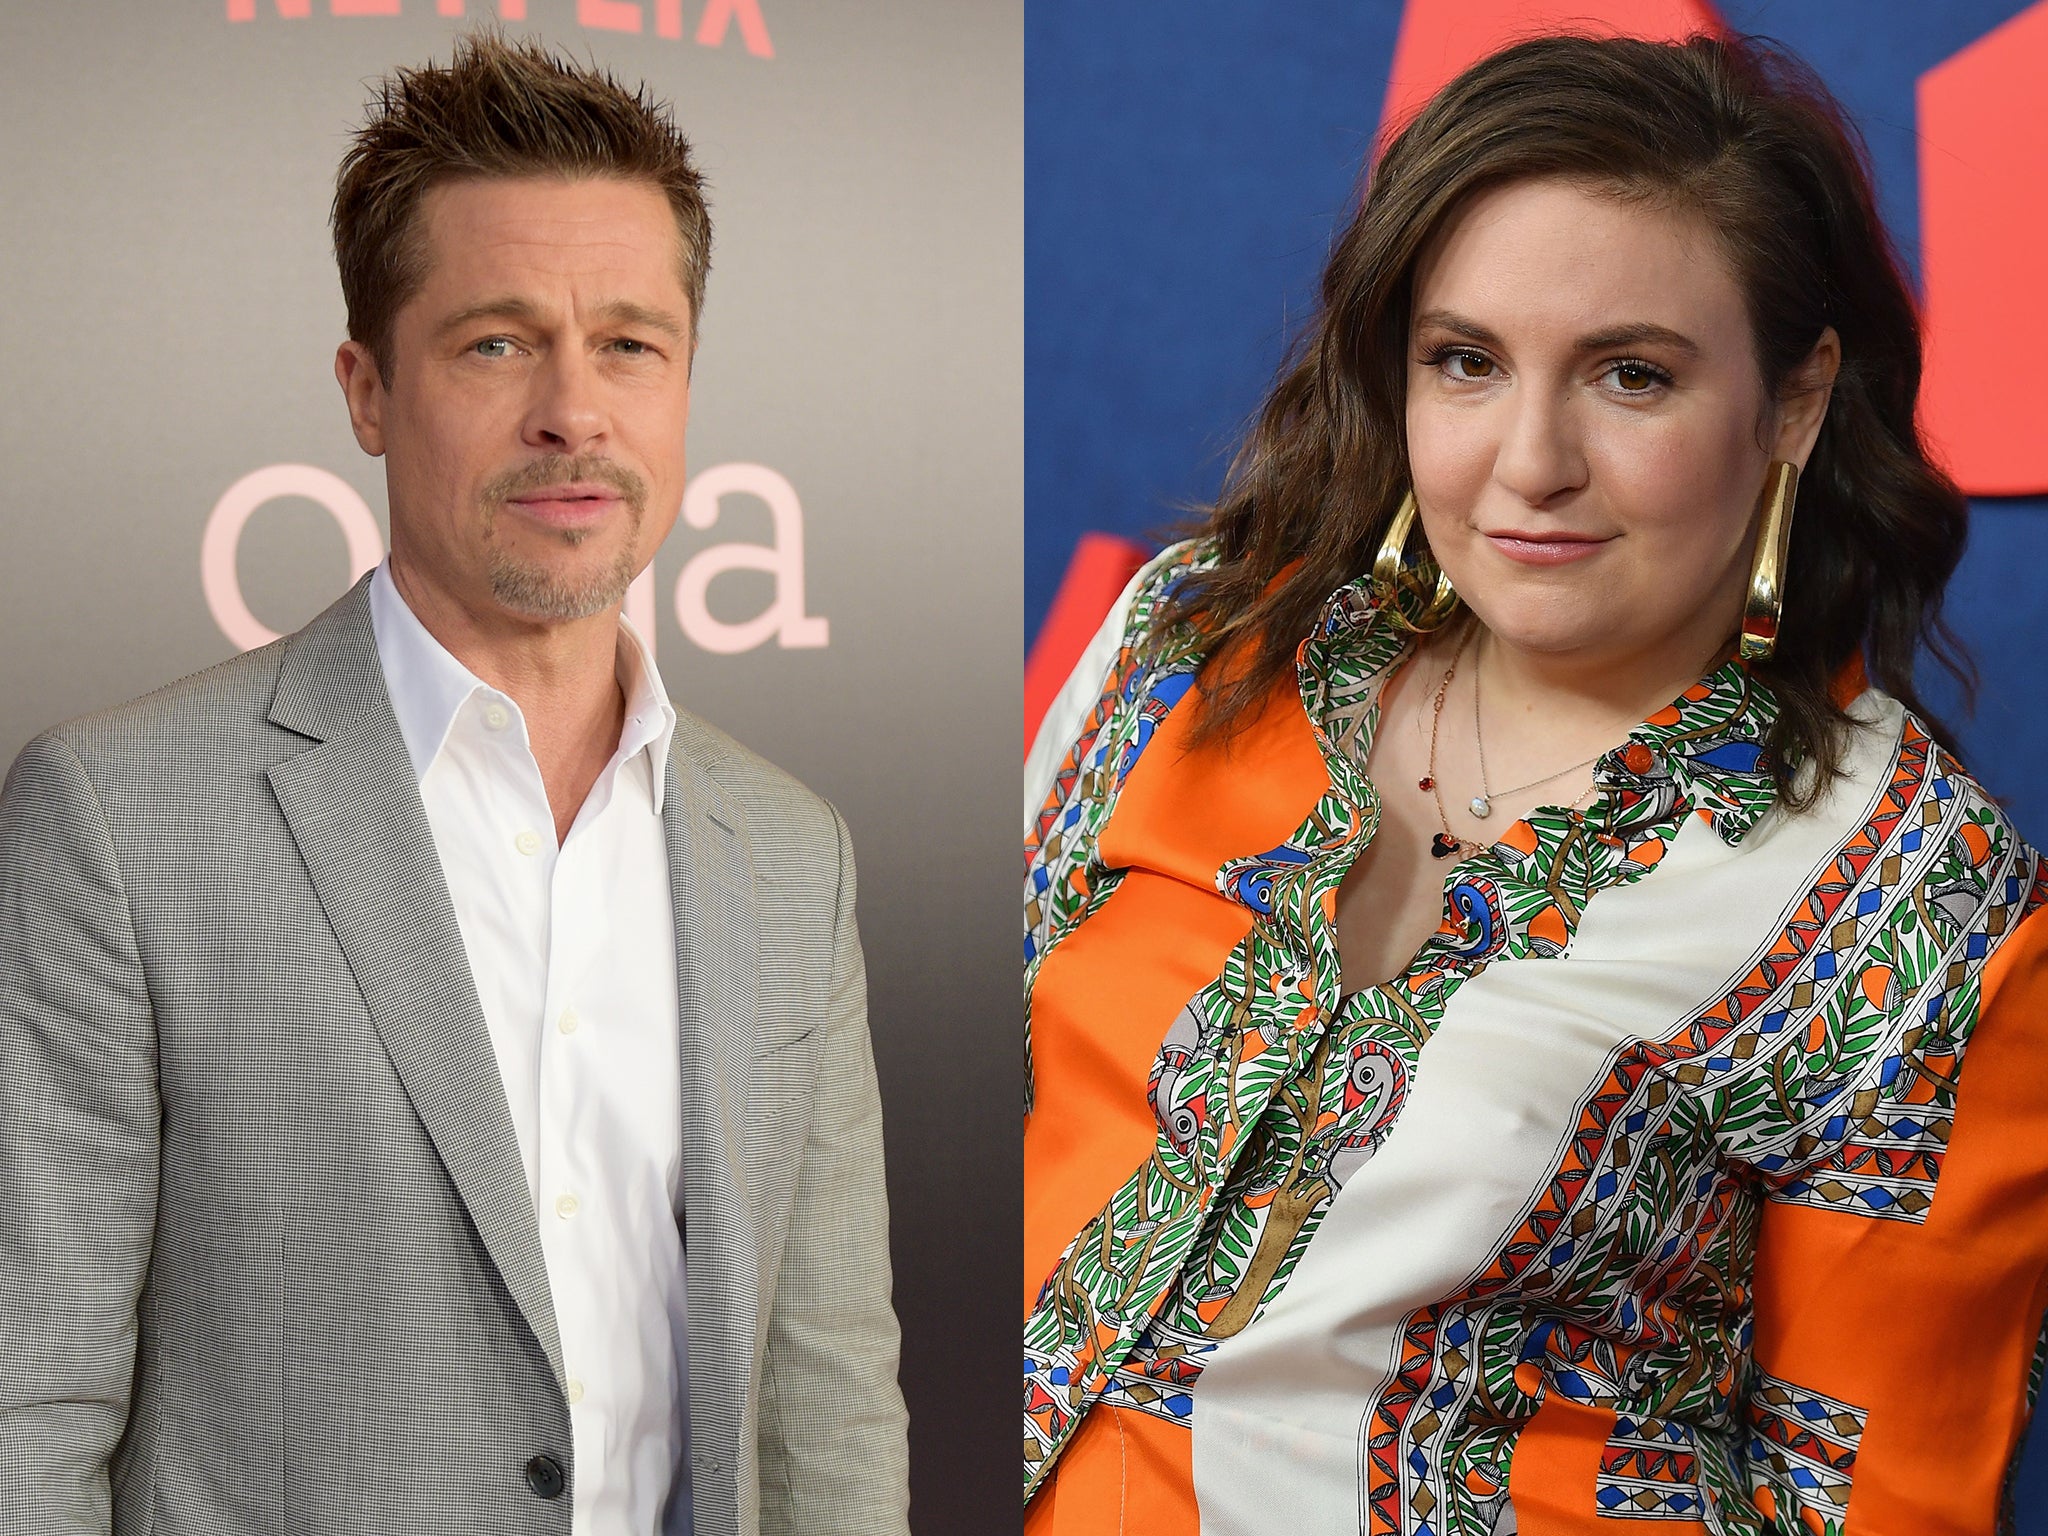 Lena Dunham Actor celebrates 33rd birthday with Brad Pitt at fundraiser and says she is happy The Independent